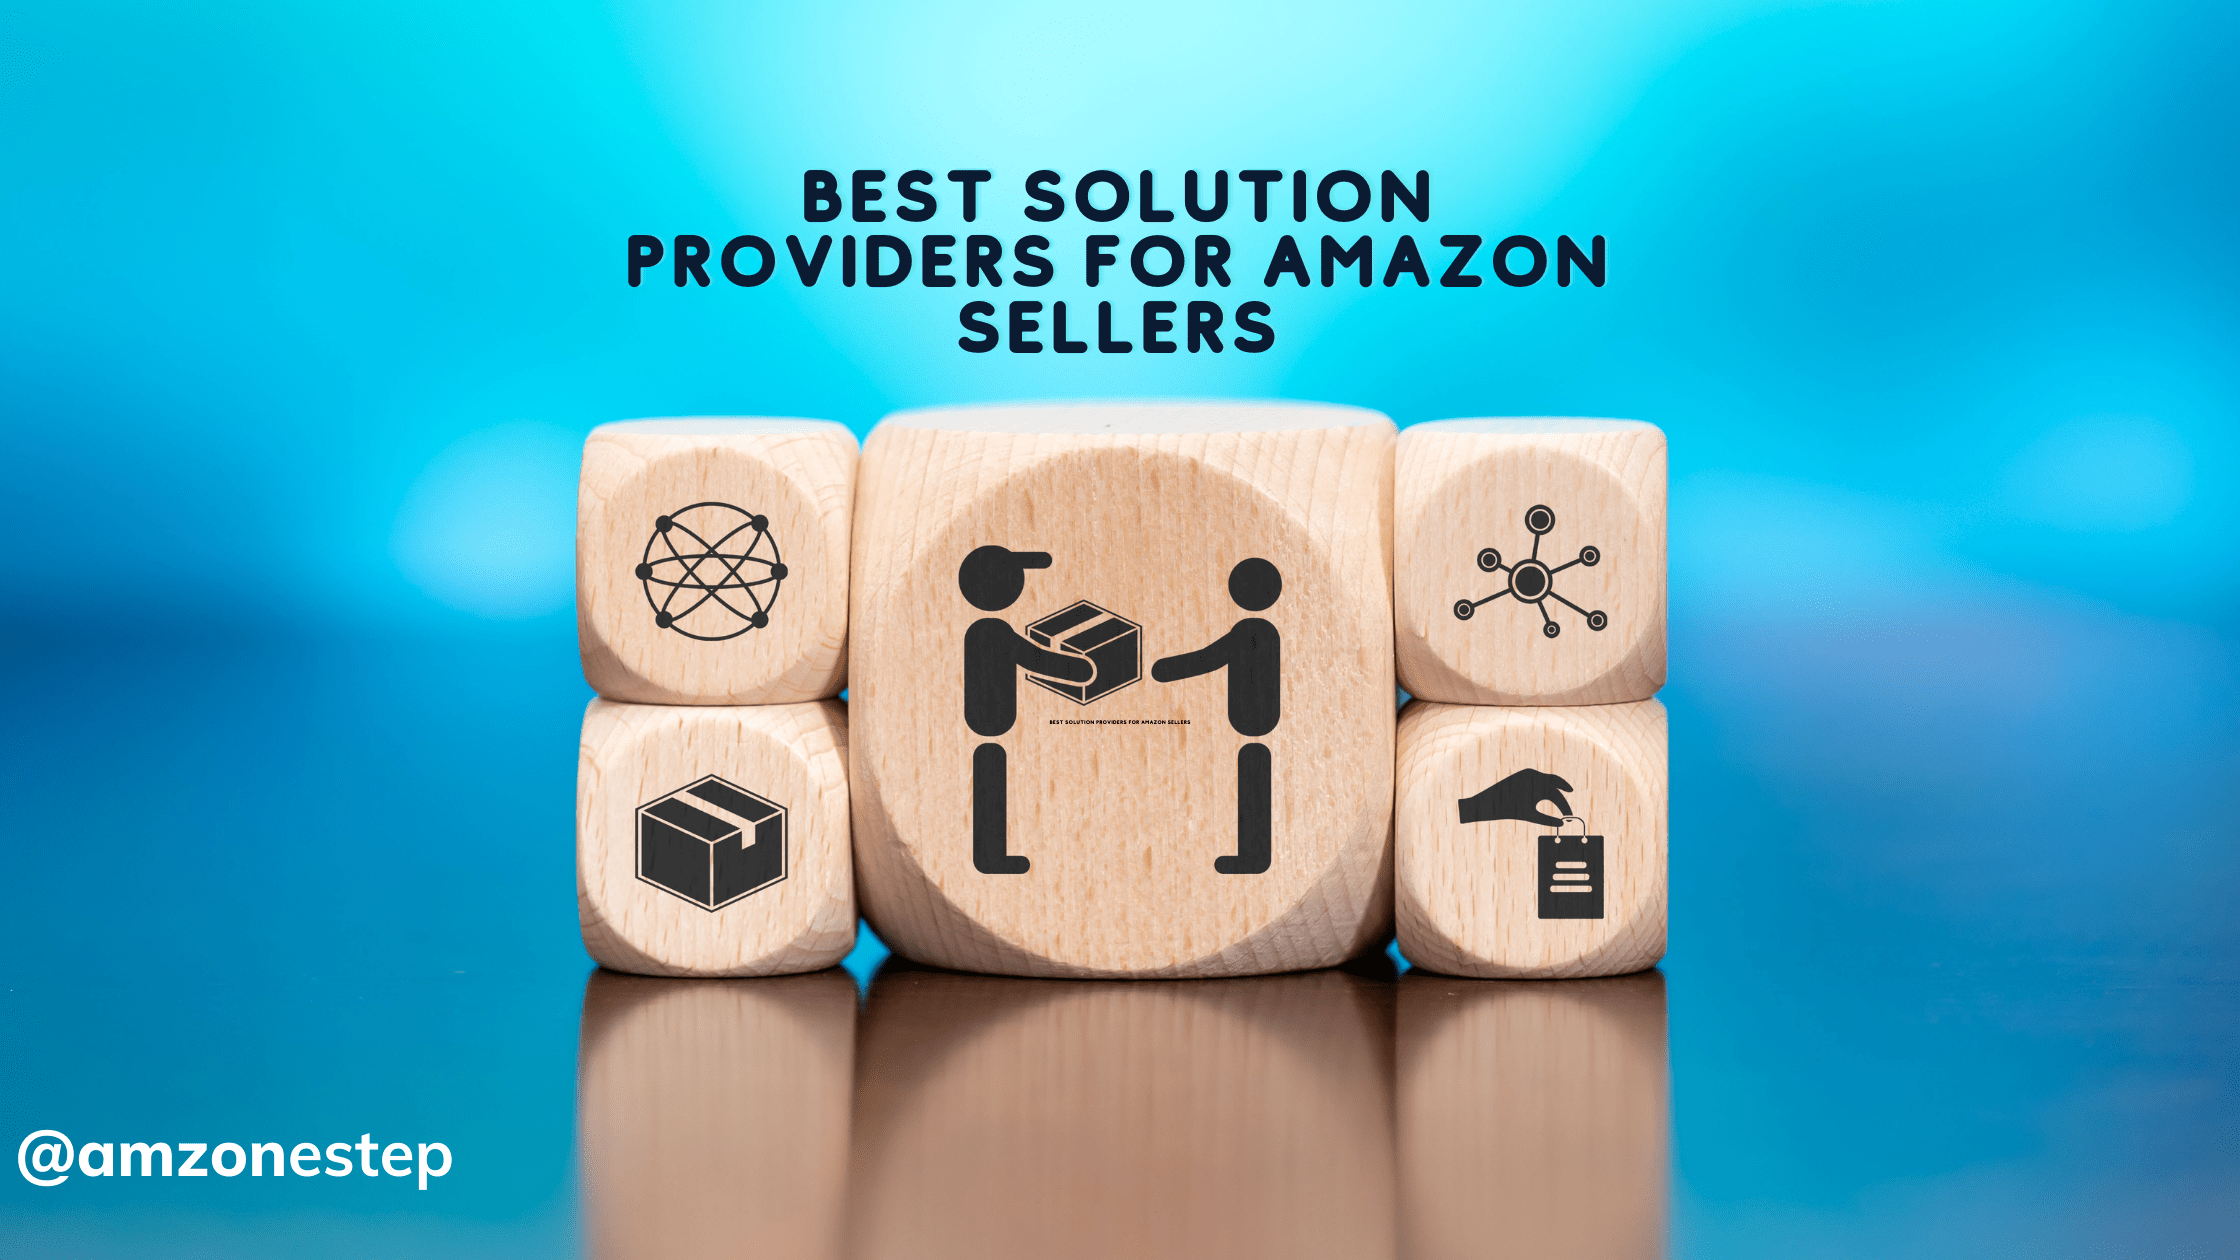 A Guide To The Best Solution Providers for Amazon Sellers